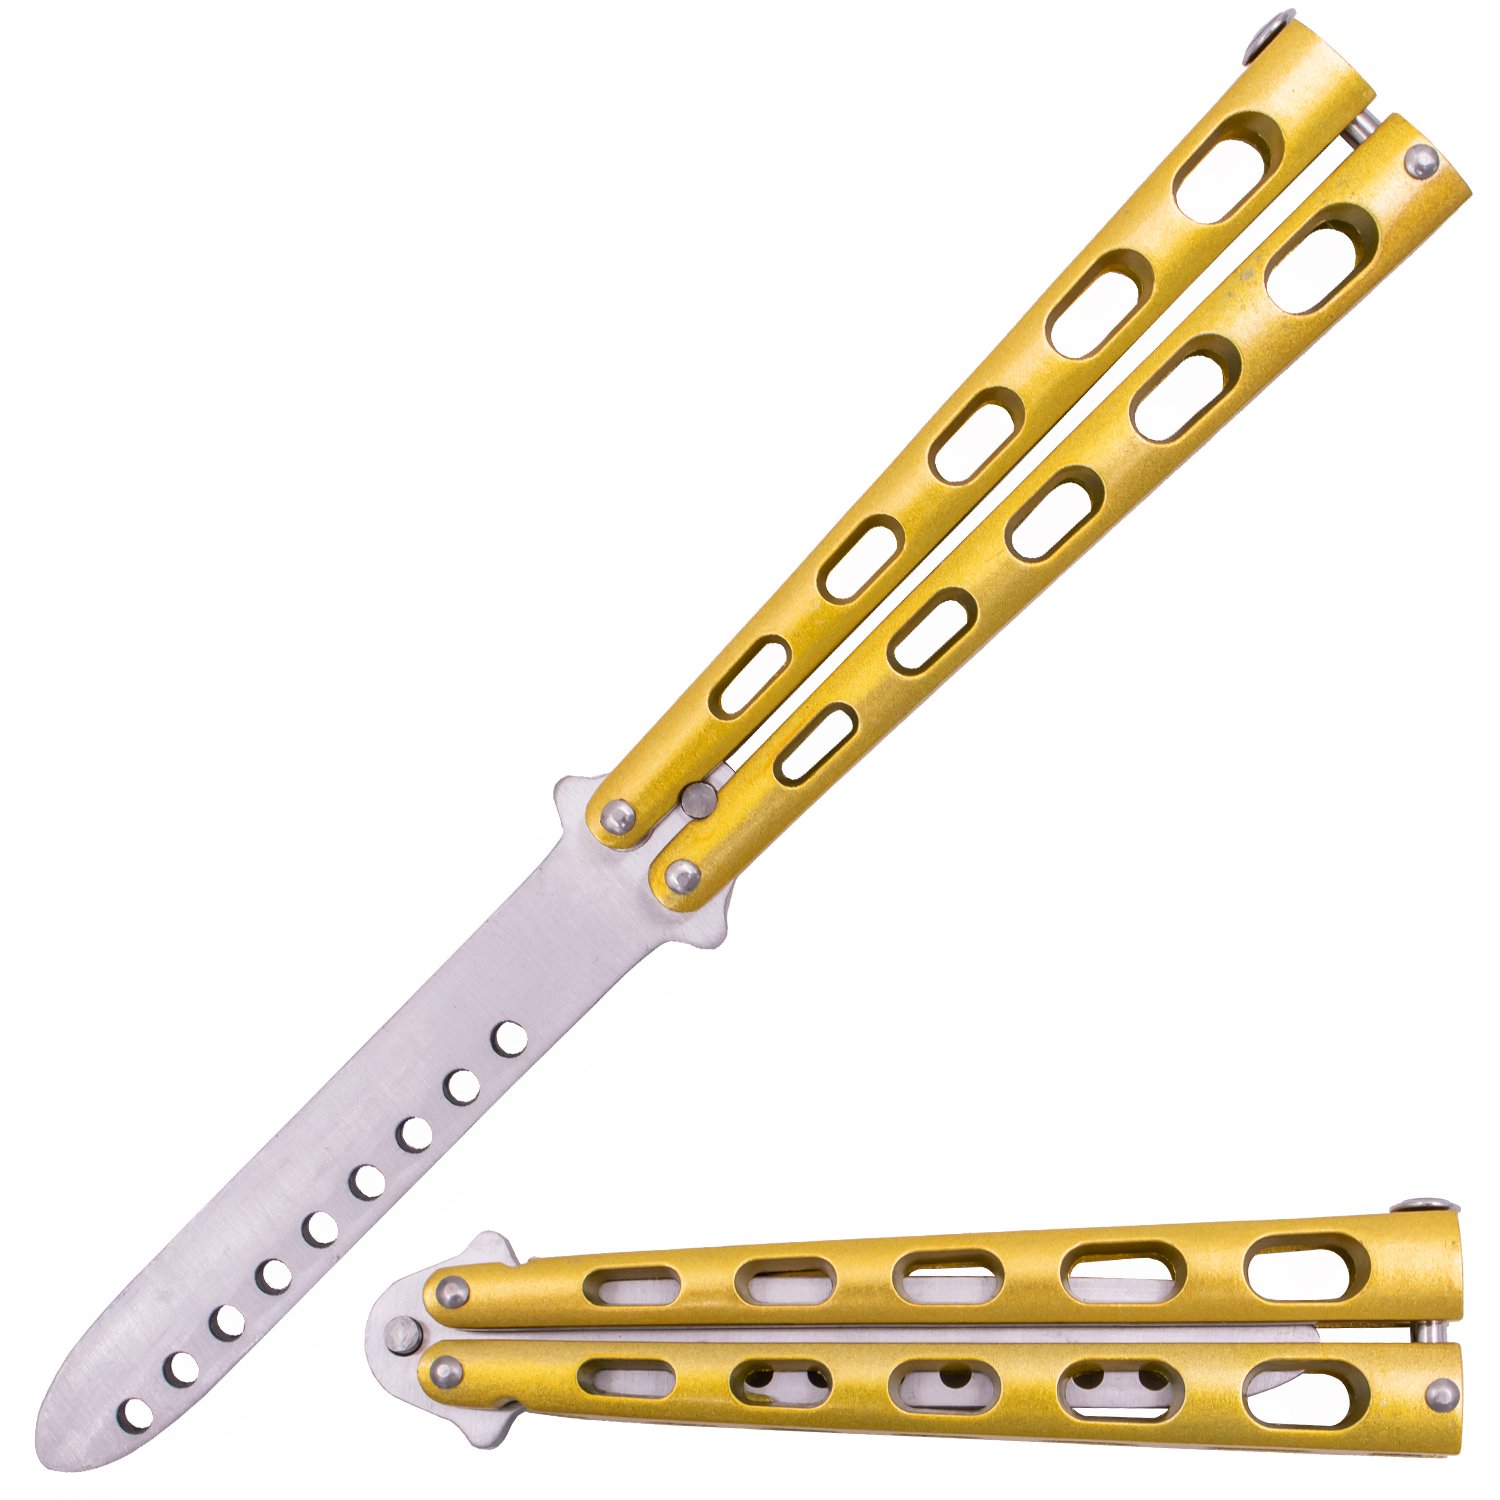 Tiger USA Butterfly Training Knife 440 Stainless 8.85 Inch   Gold